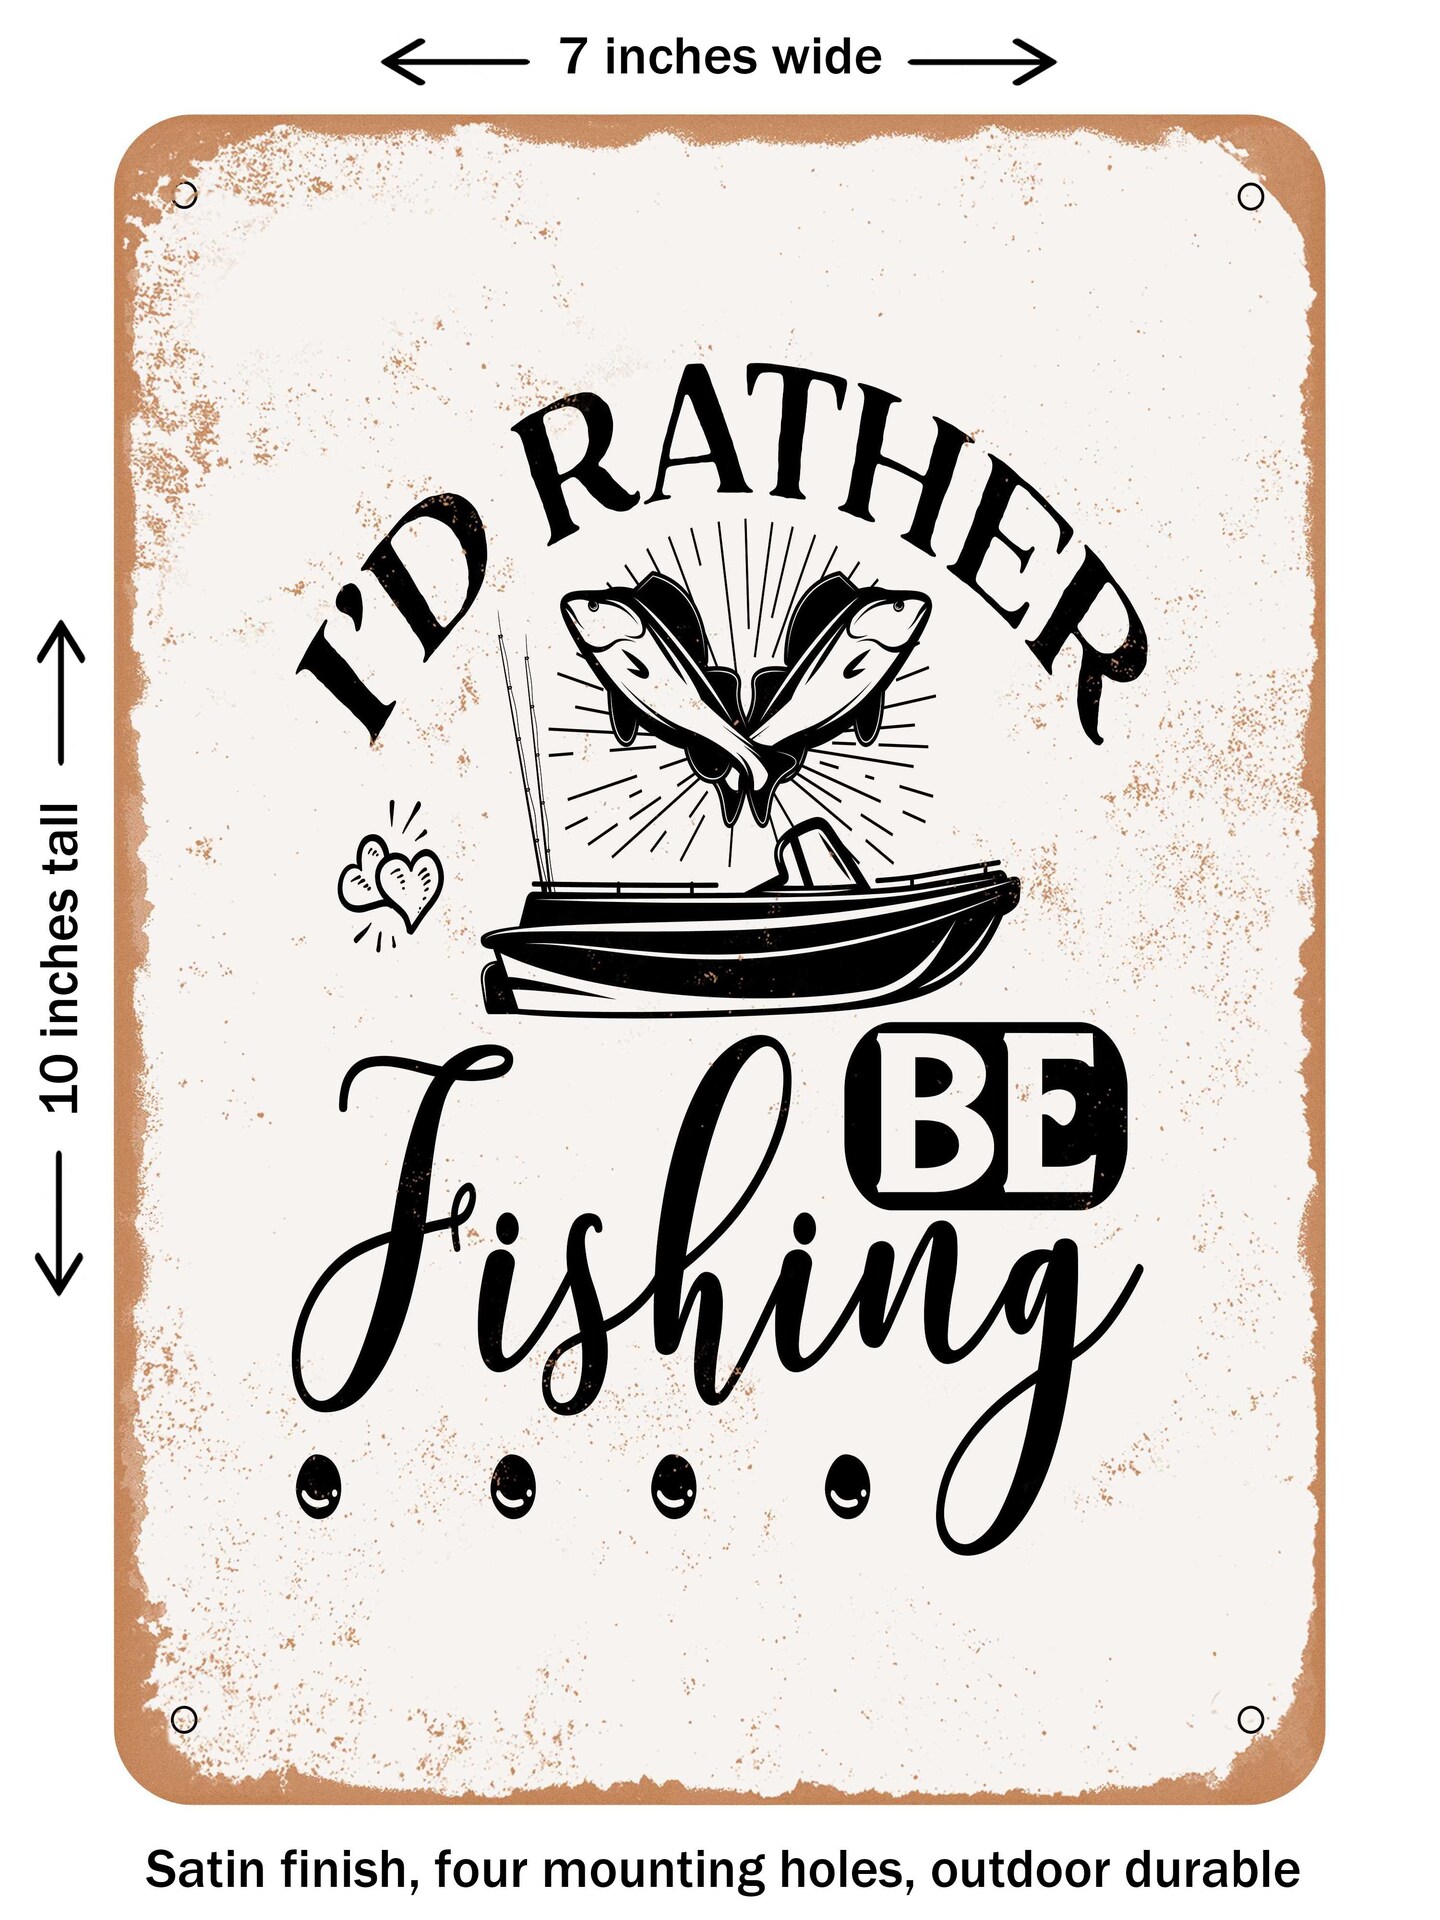 DECORATIVE METAL SIGN - I'd Rather Be Fishing - Vintage Rusty Look